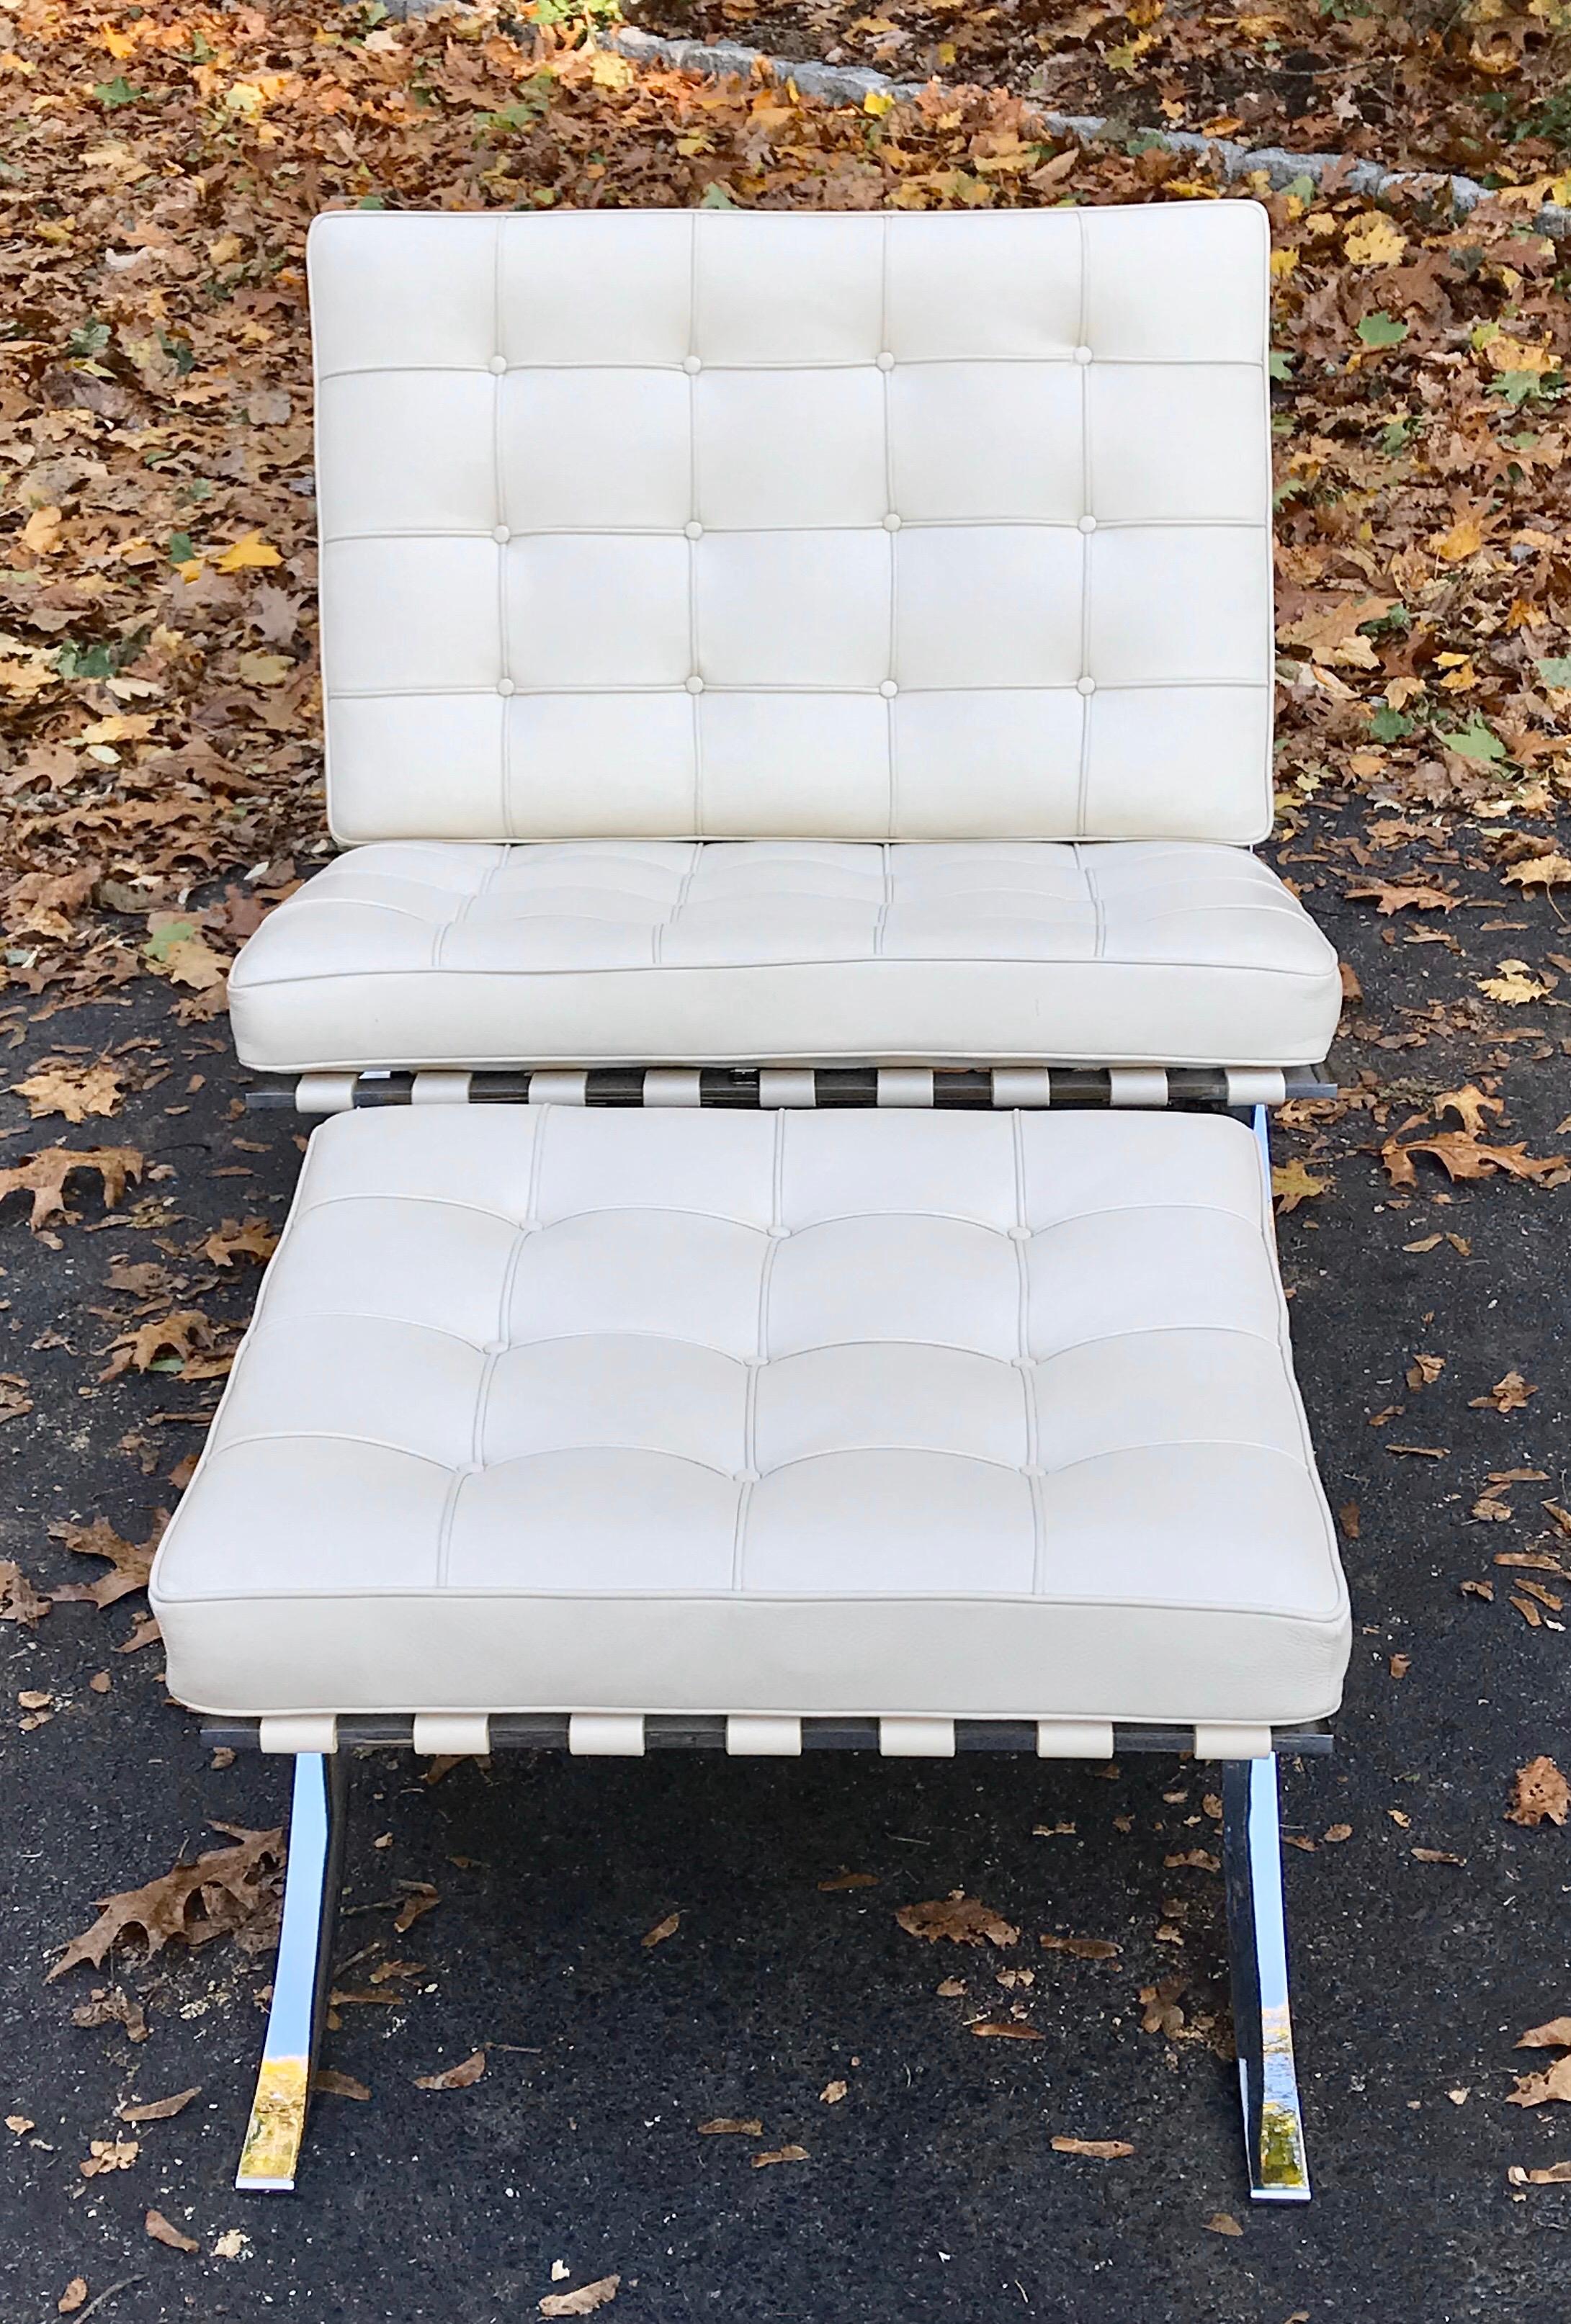 Early 2000 production of Knoll Barcelona chair and ottoman, ivory white leather.